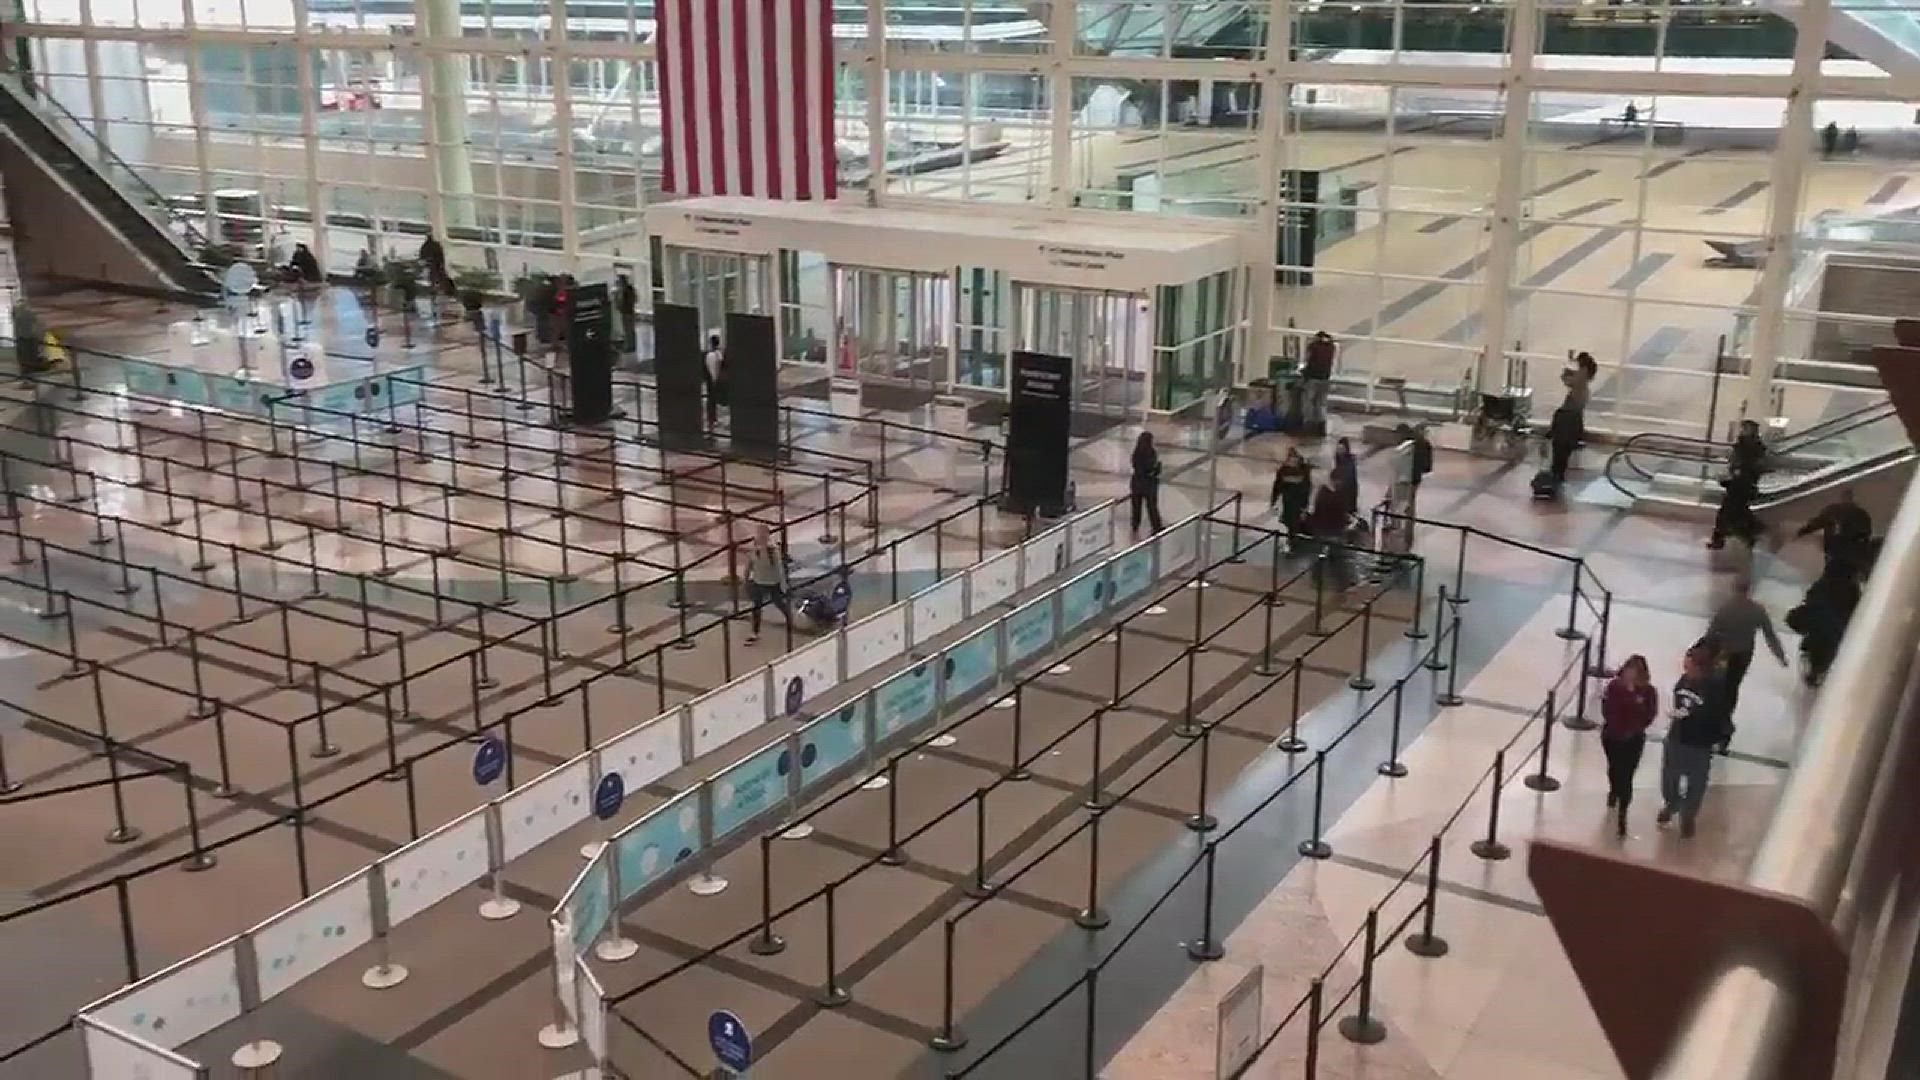 As what some called a "bomb cyclone" headed to Colorado -- leading to the cancellation of hundreds of flights -- the security line at Denver International Airport was completely empty. There were, however, plenty of TSA officers working.